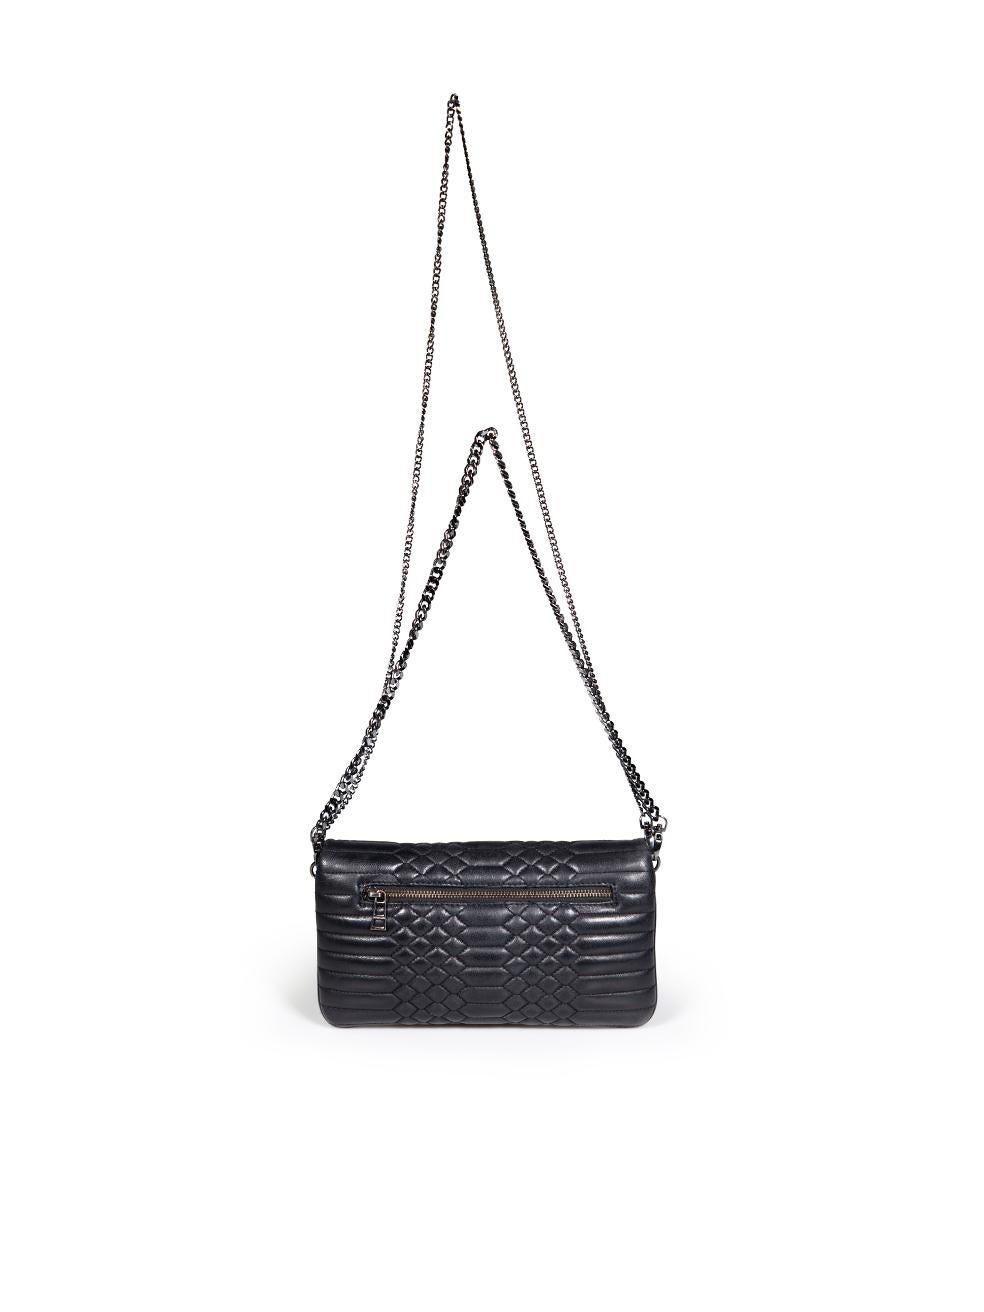 Zadig & Voltaire Black Leather Rocky Mat Crossbody Bag In Good Condition For Sale In London, GB